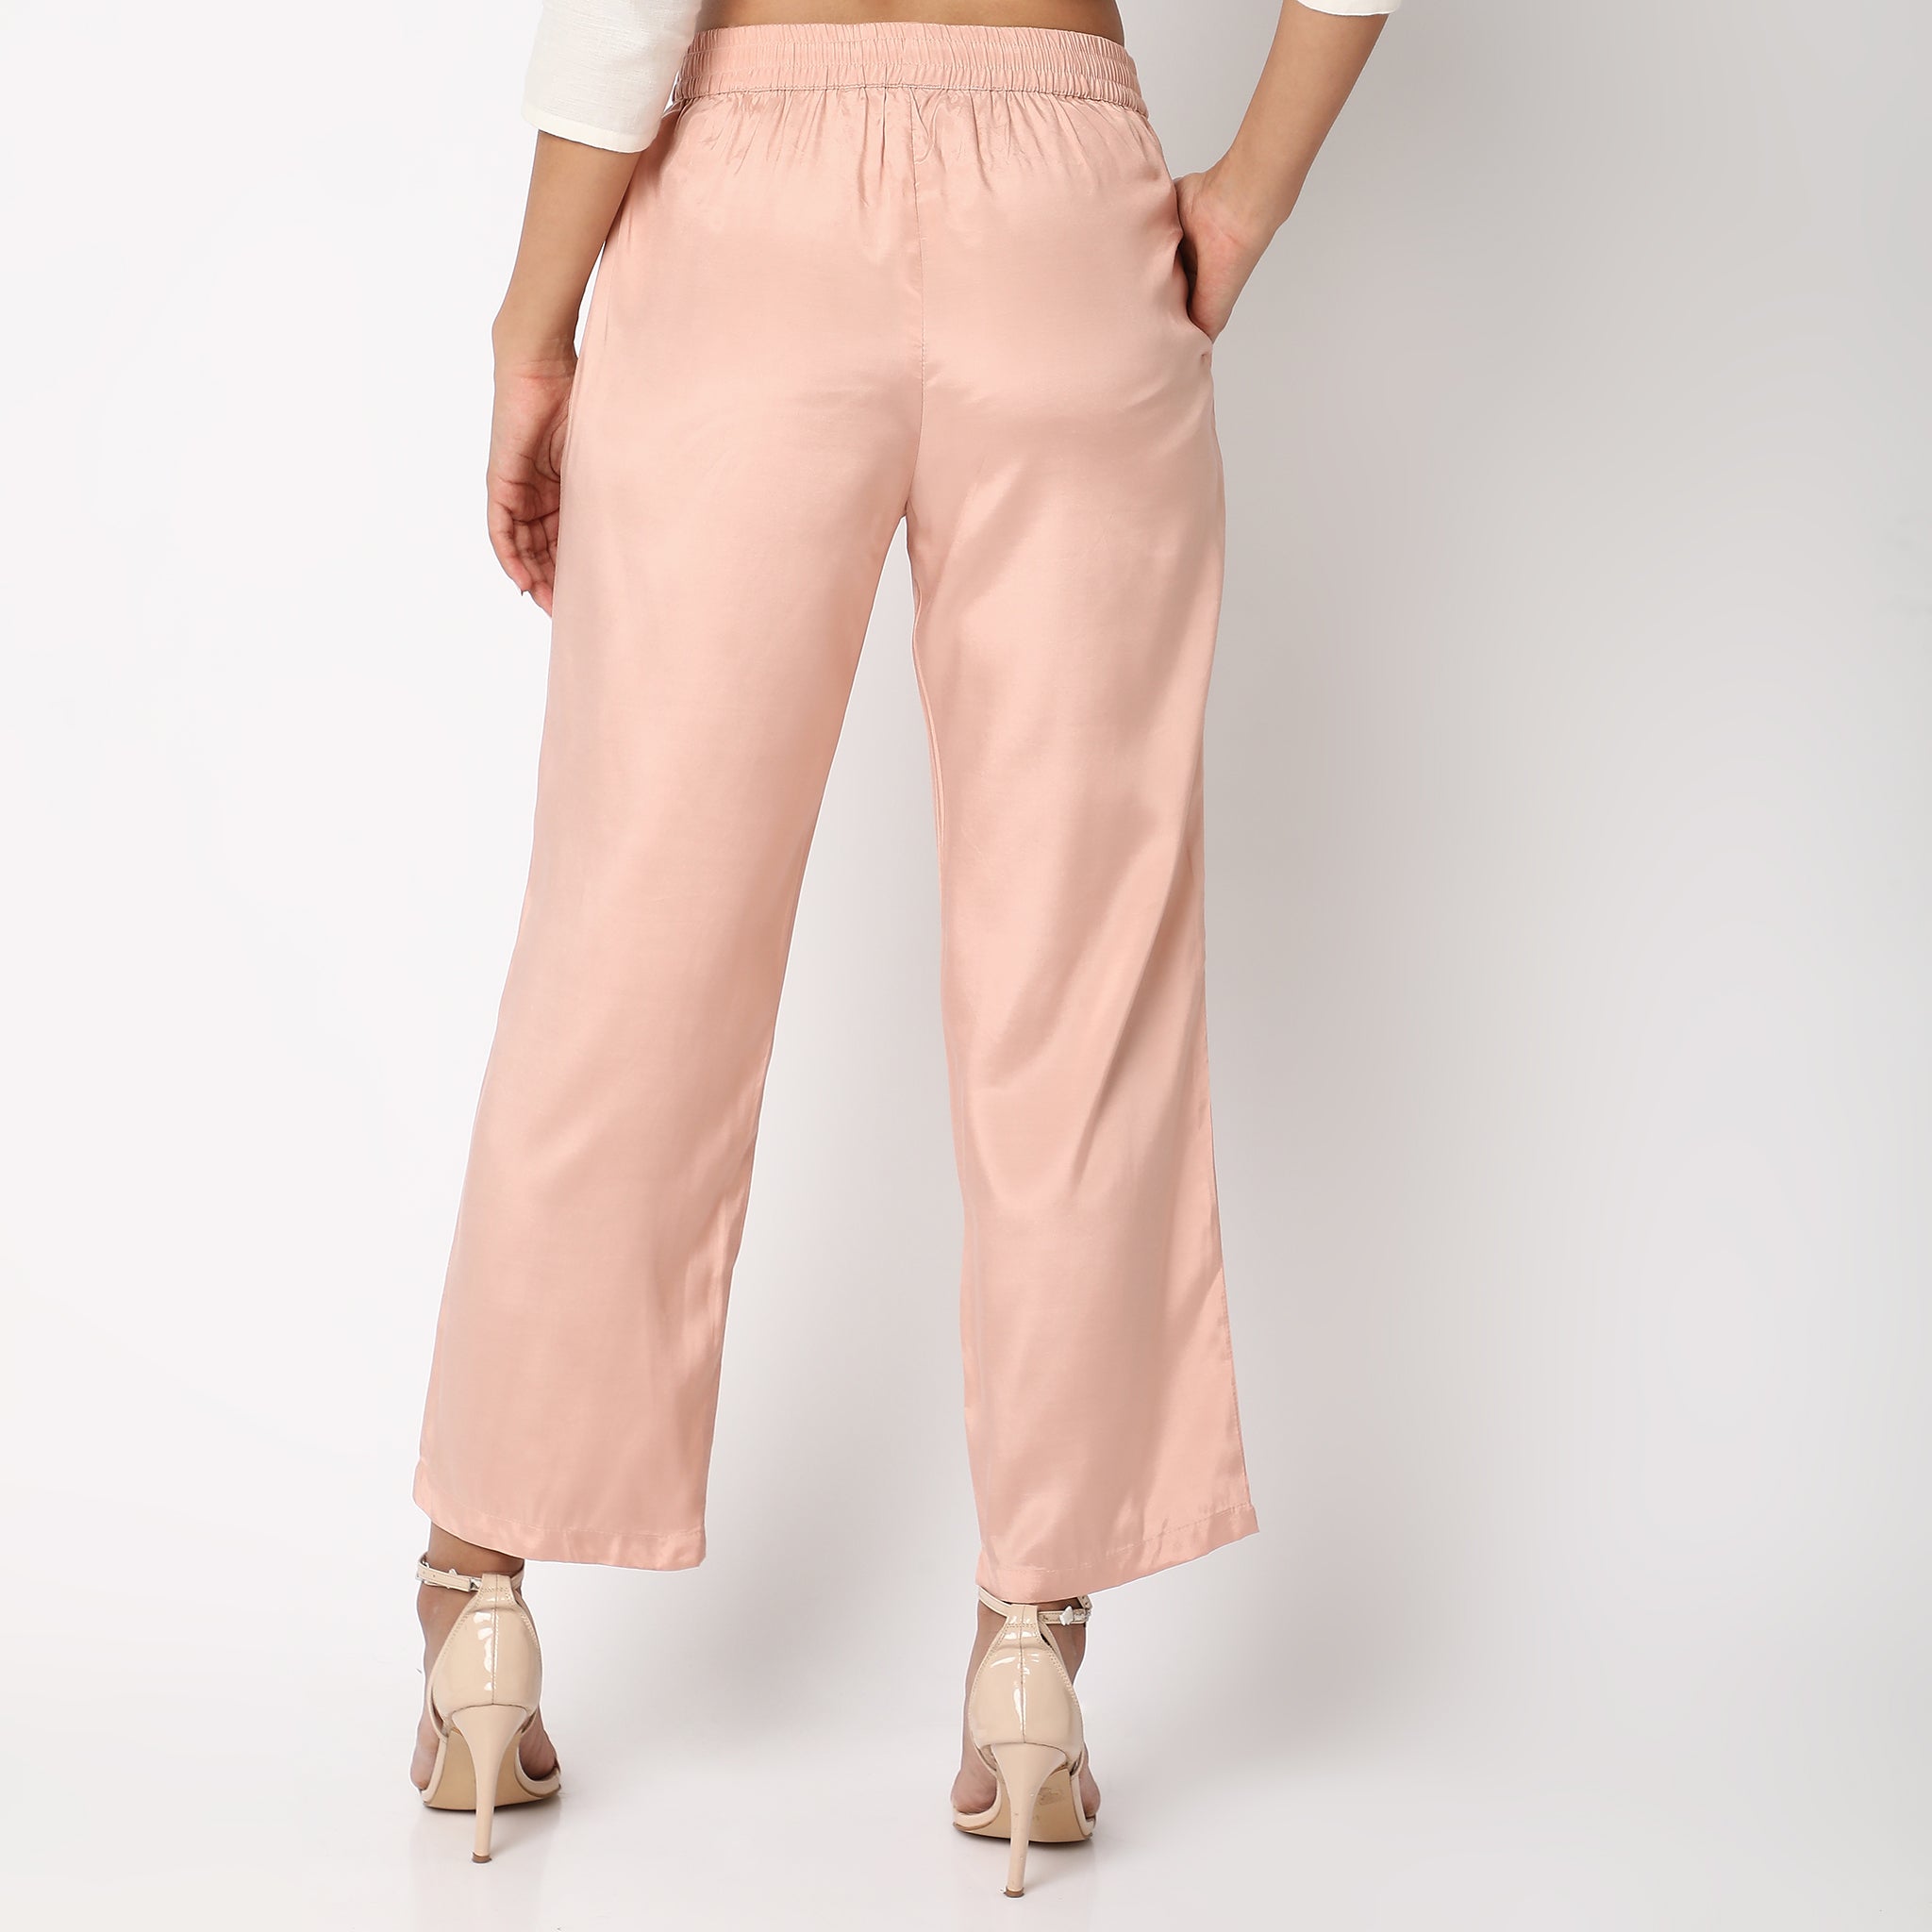 Straight Fit Solid Ethnic Pants